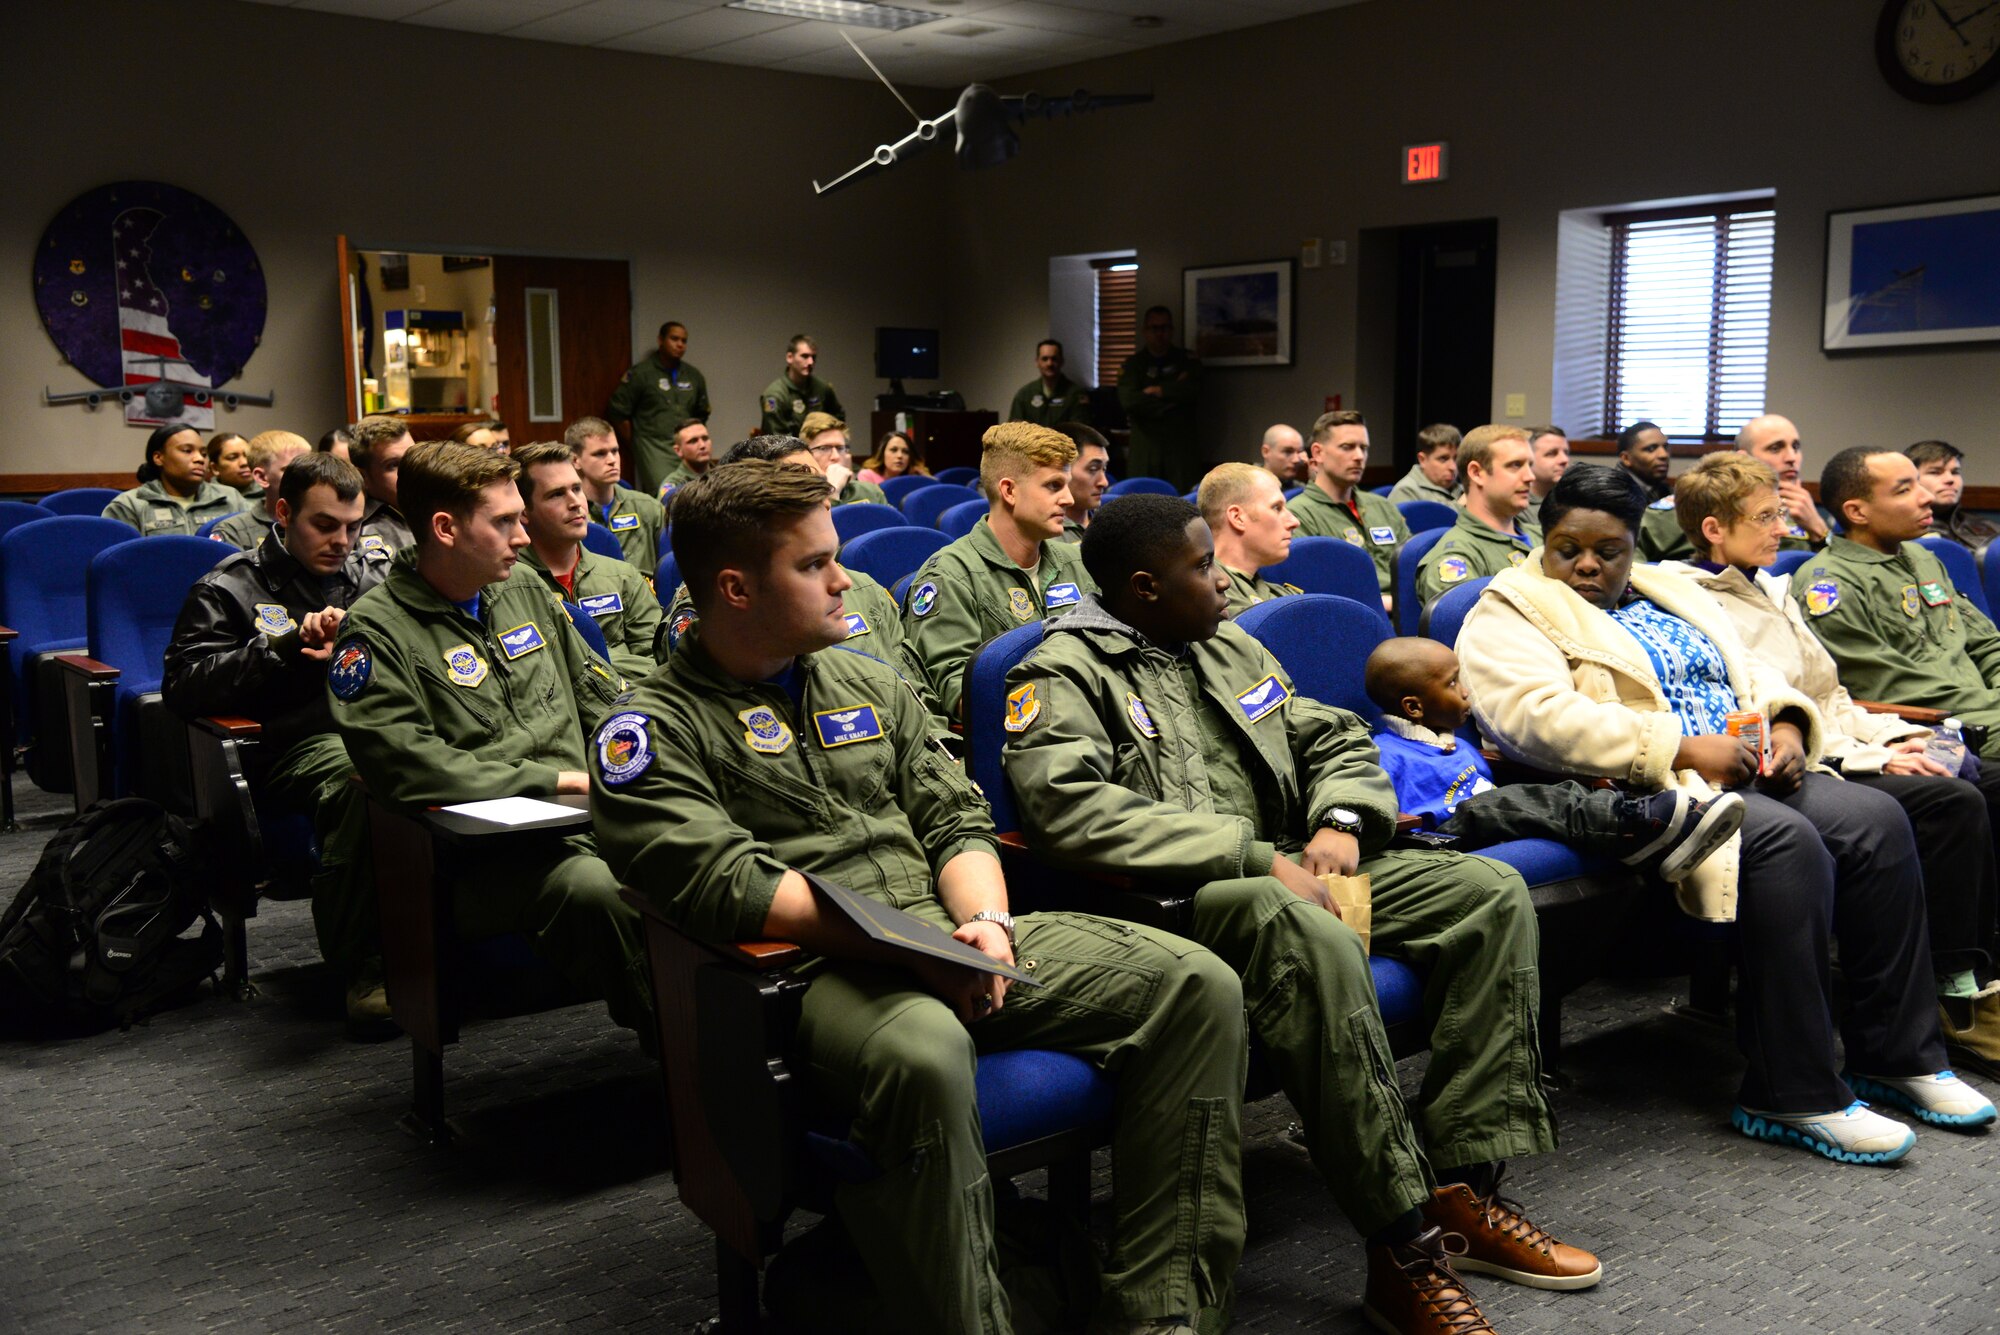 From left, Capt. Michael Knapp, 3rd Airlift Squadron chief of standards and evaluation and one of the Pilot for a Day program leads, Kareem Bennett and his family participate in a 3rd AS roll call March 16, 2018, at Dover Air Force Base, Del. Bennett and his family were invited by the 3rd AS to participate in their honorary Pilot for a Day program. (U.S. Air Force photo by Staff Sgt. Aaron J. Jenne)